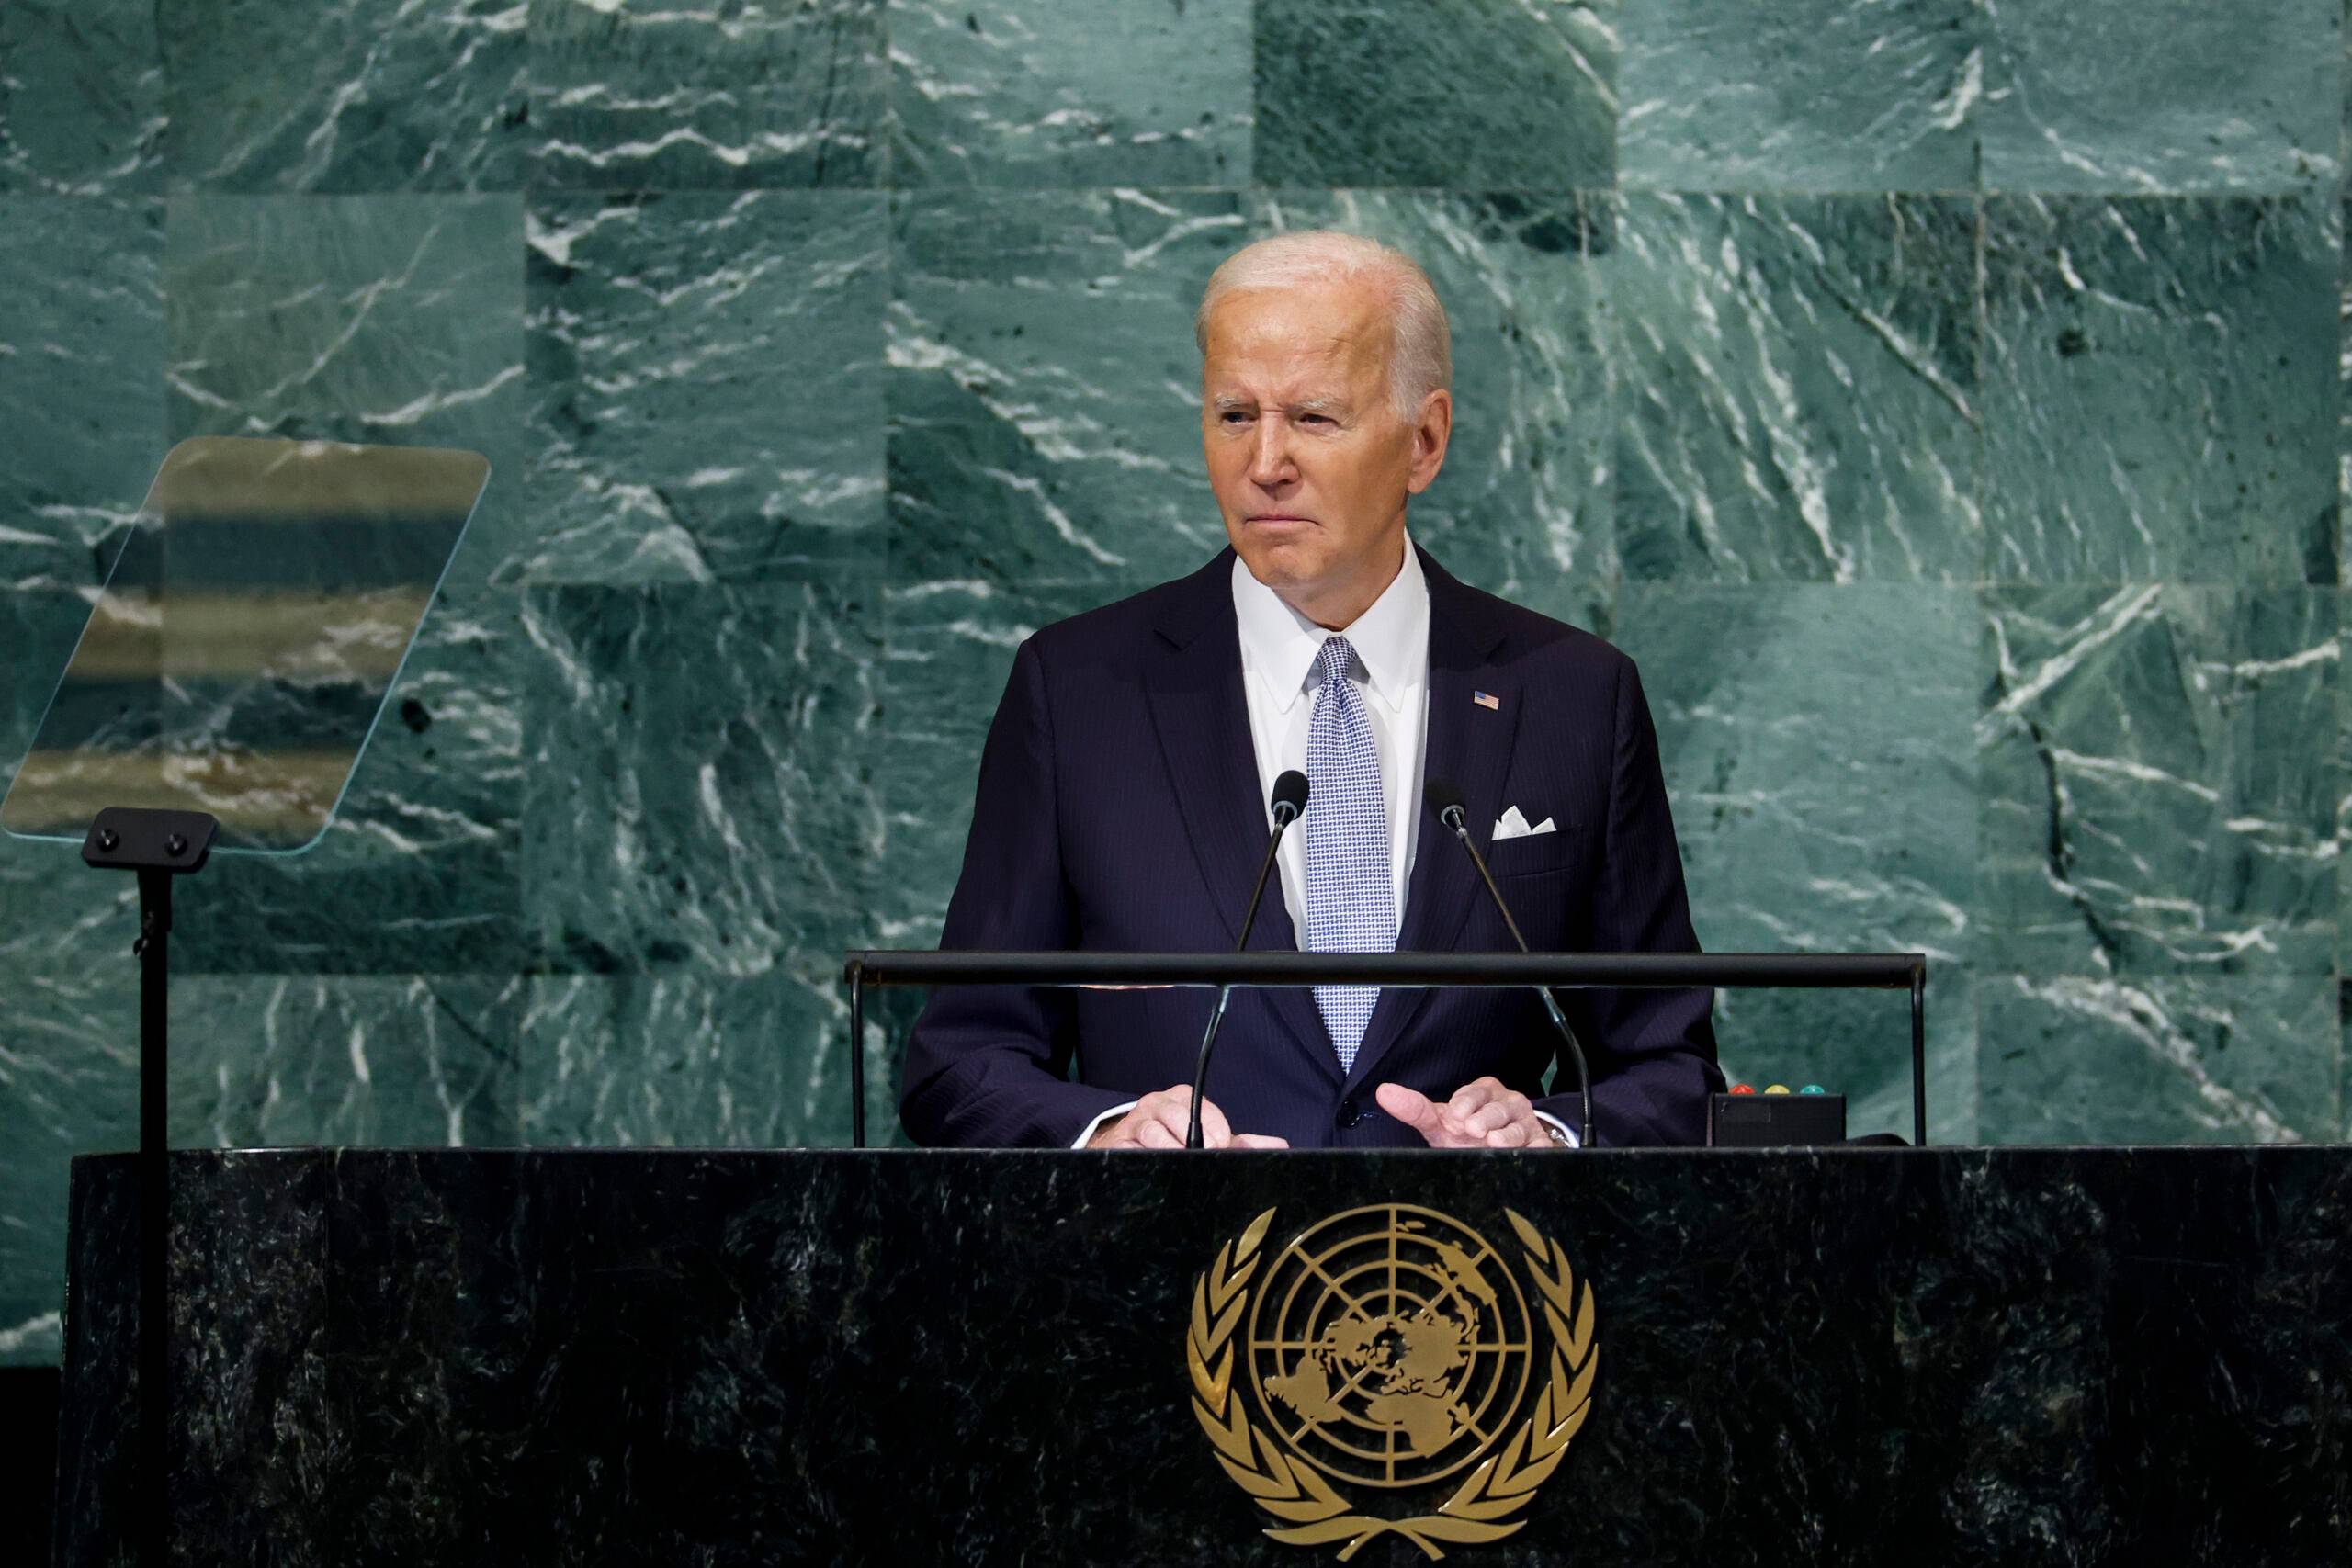 NEW YORK, NEW YORK - SEPTEMBER 21: U.S. President Joe Biden speaks during the 77th session of the United Nations General Assembly (UNGA) at U.N. headquarters on September 21, 2022 in New York City. During his remark Biden condemned Russia for its invasion in Ukraine and discussed the United States investment in combatting climate change. After two years of holding the session virtually or in a hybrid format, 157 heads of state and representatives of government are expected to attend the General Assembly in person.   Anna Moneymaker/Getty Images/AFP (Photo by Anna Moneymaker / GETTY IMAGES NORTH AMERICA / Getty Images via AFP)